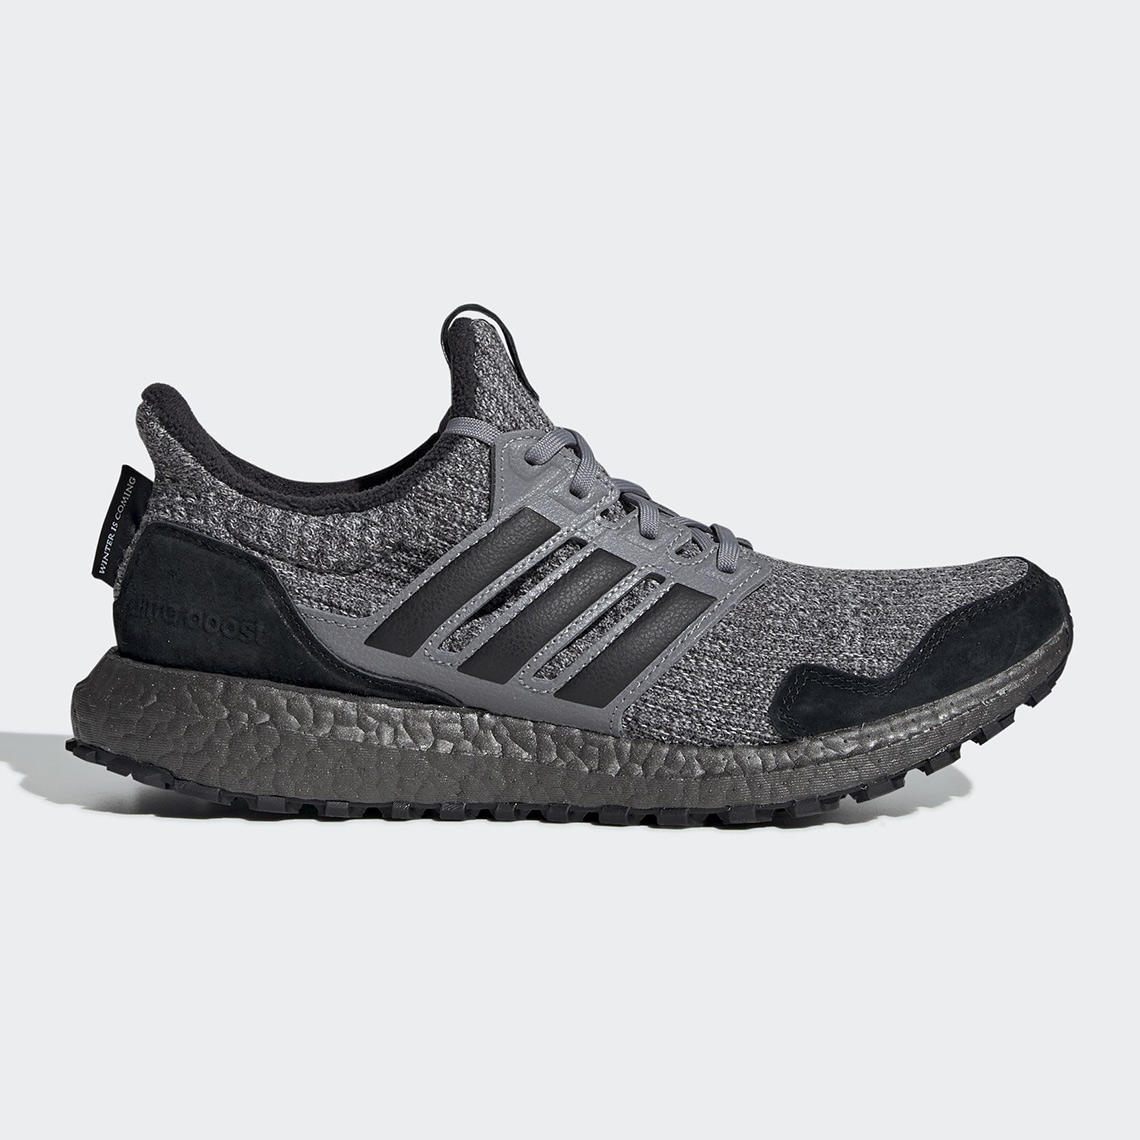 adidas boost shoes 2019